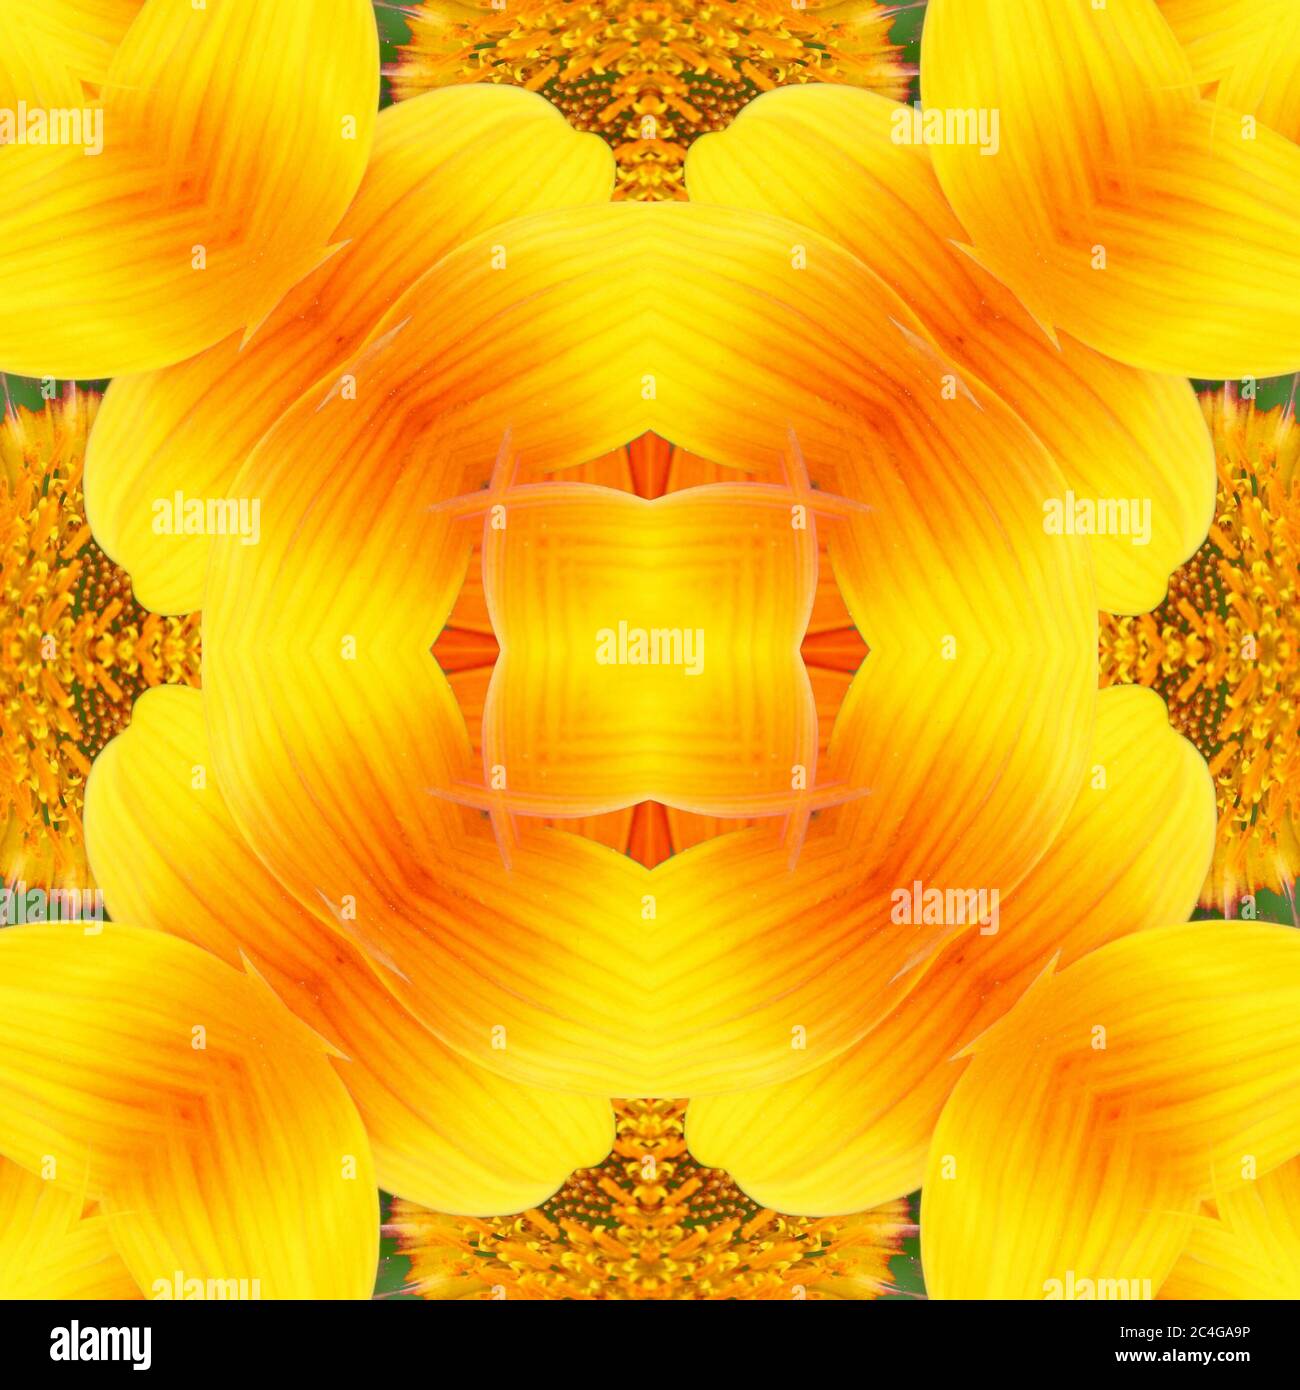 Seamless symmetrical pattern abstract yellow flower texture Stock Photo